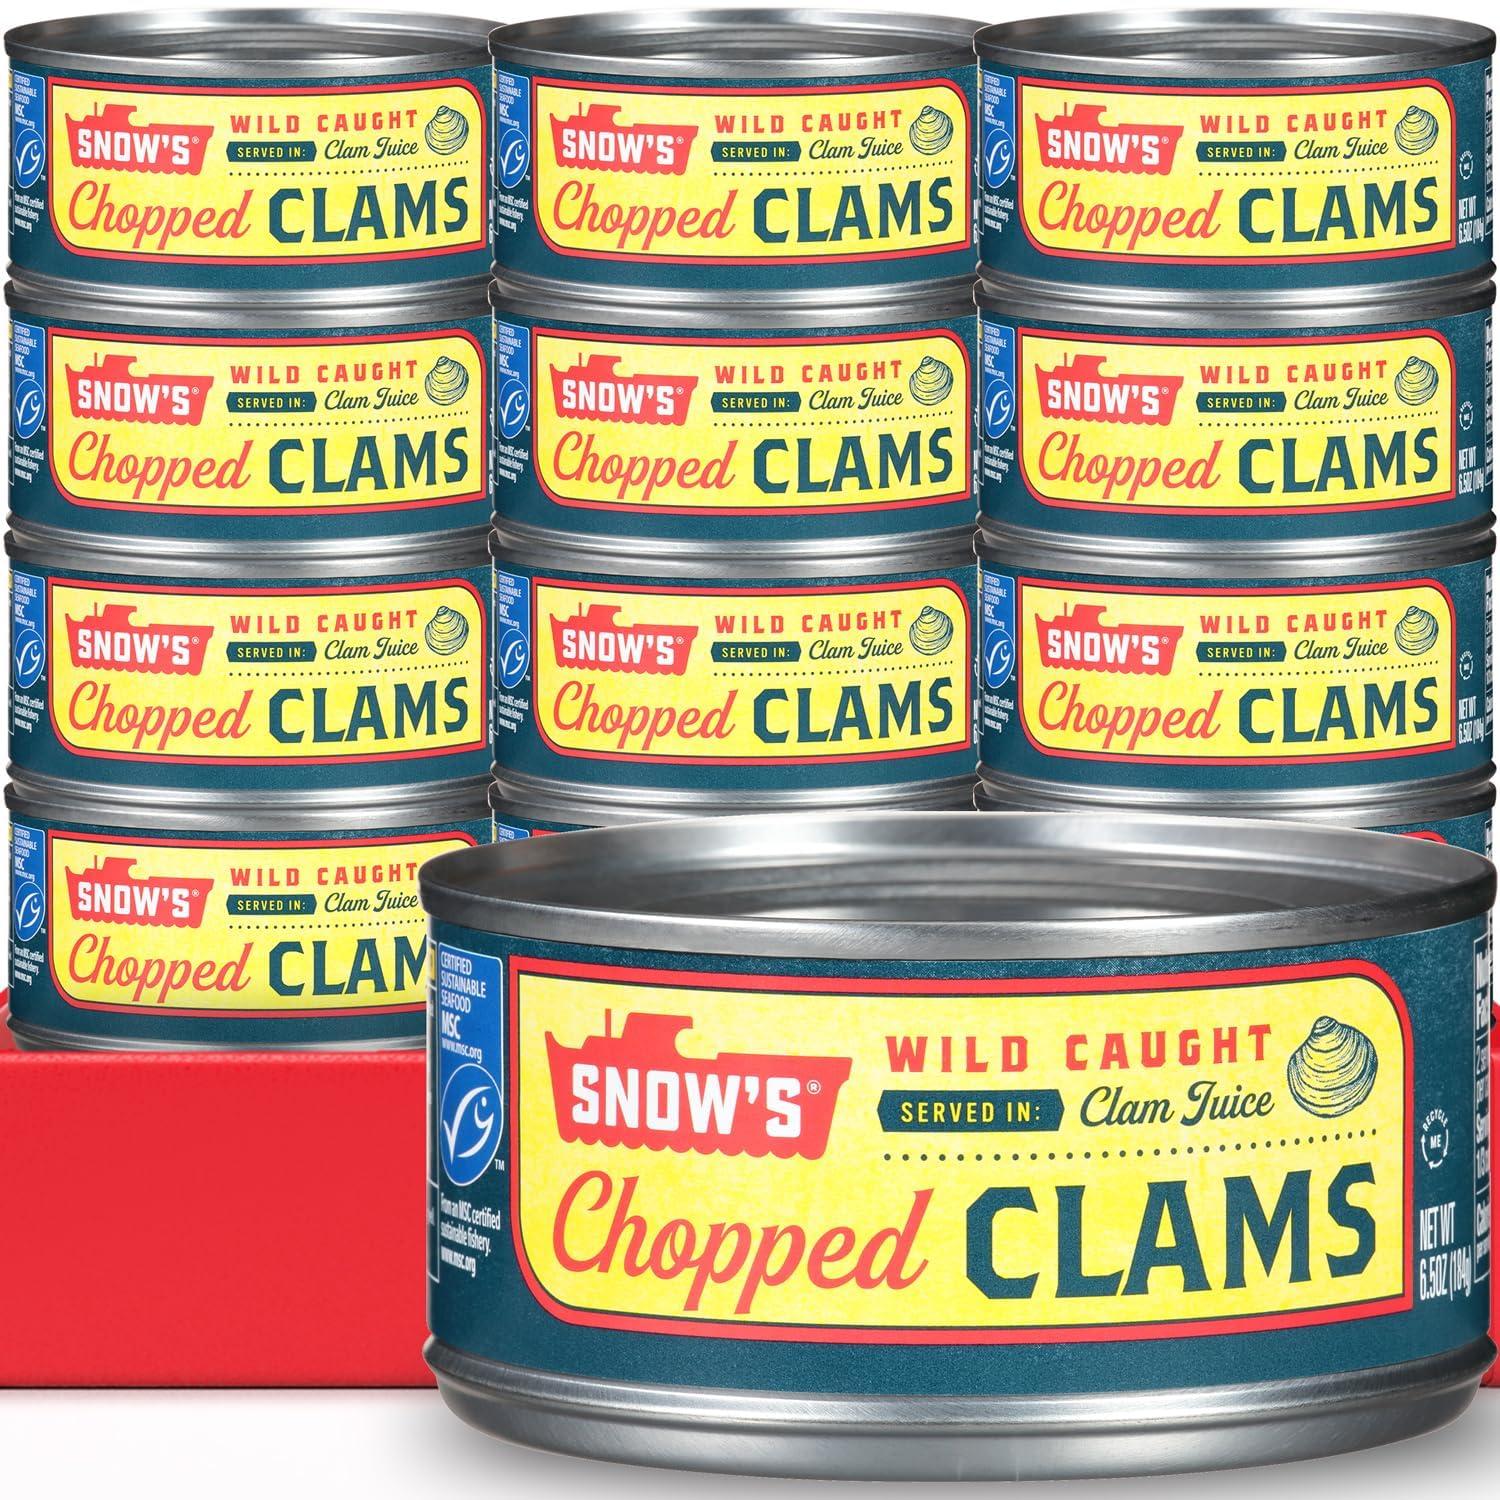 Snows Wild Clams Canned 12 Pack for $10.91